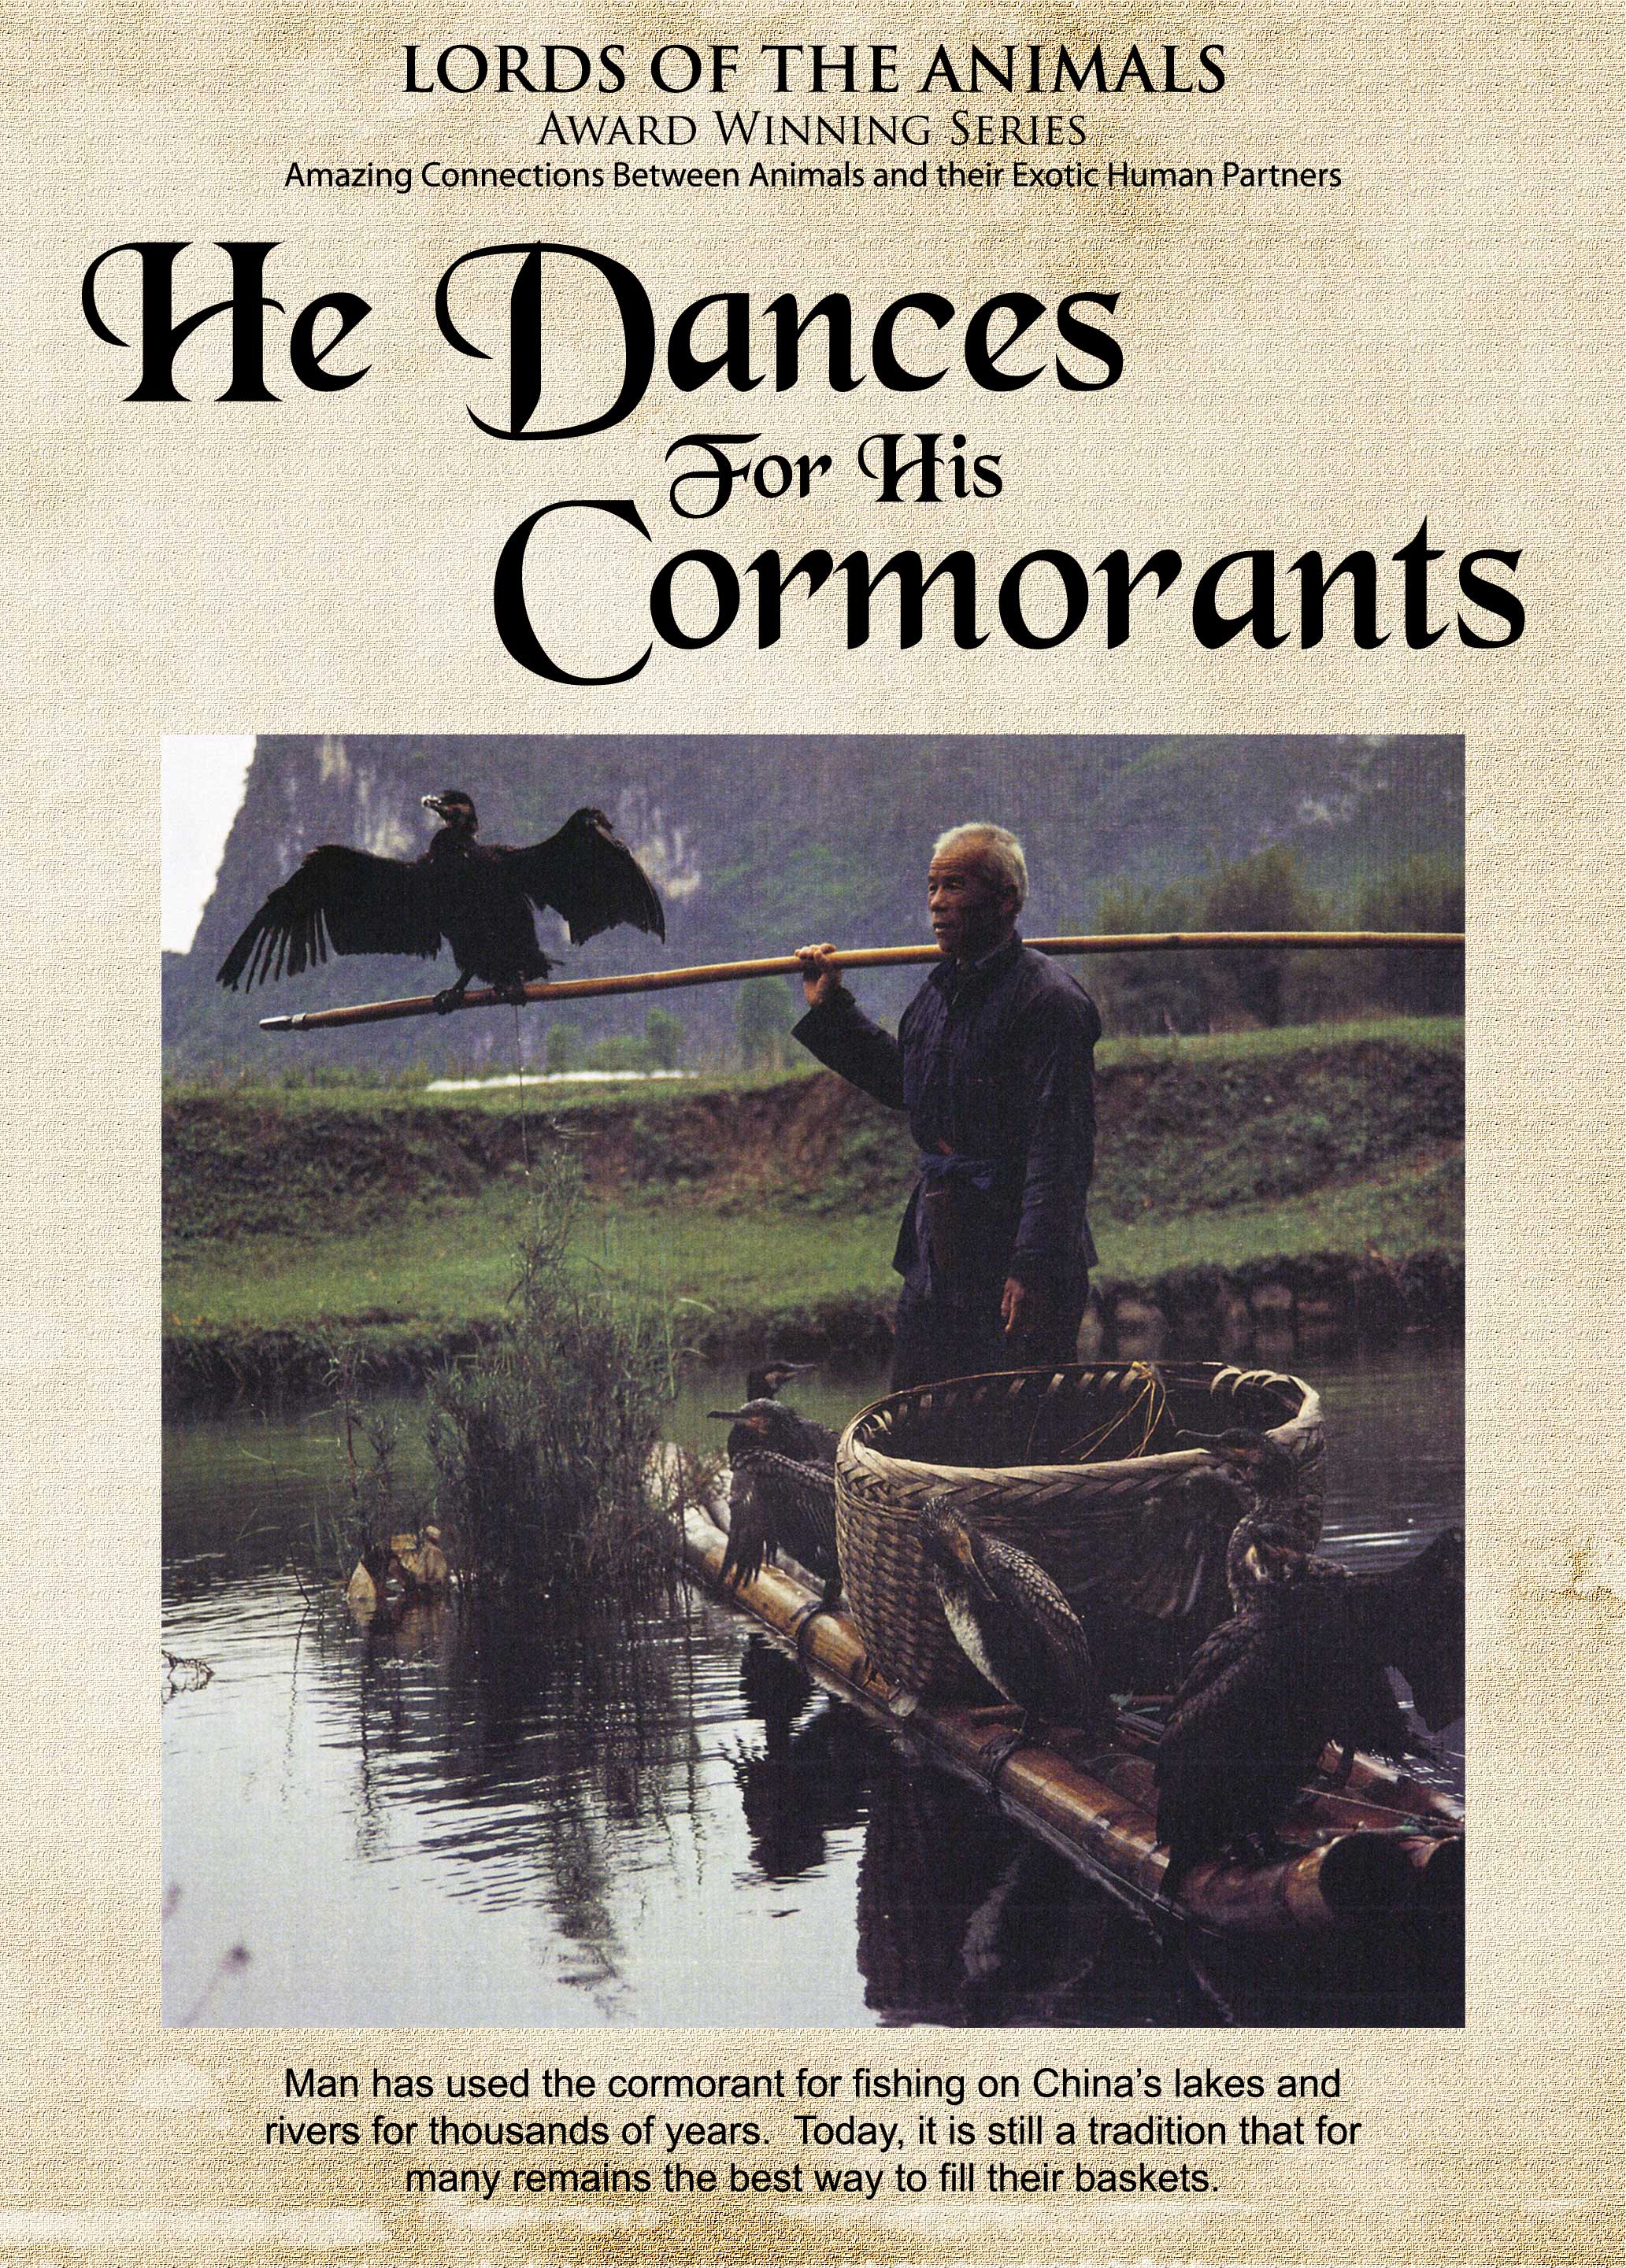 Lords of the Animals: He Dances for His Cormorants